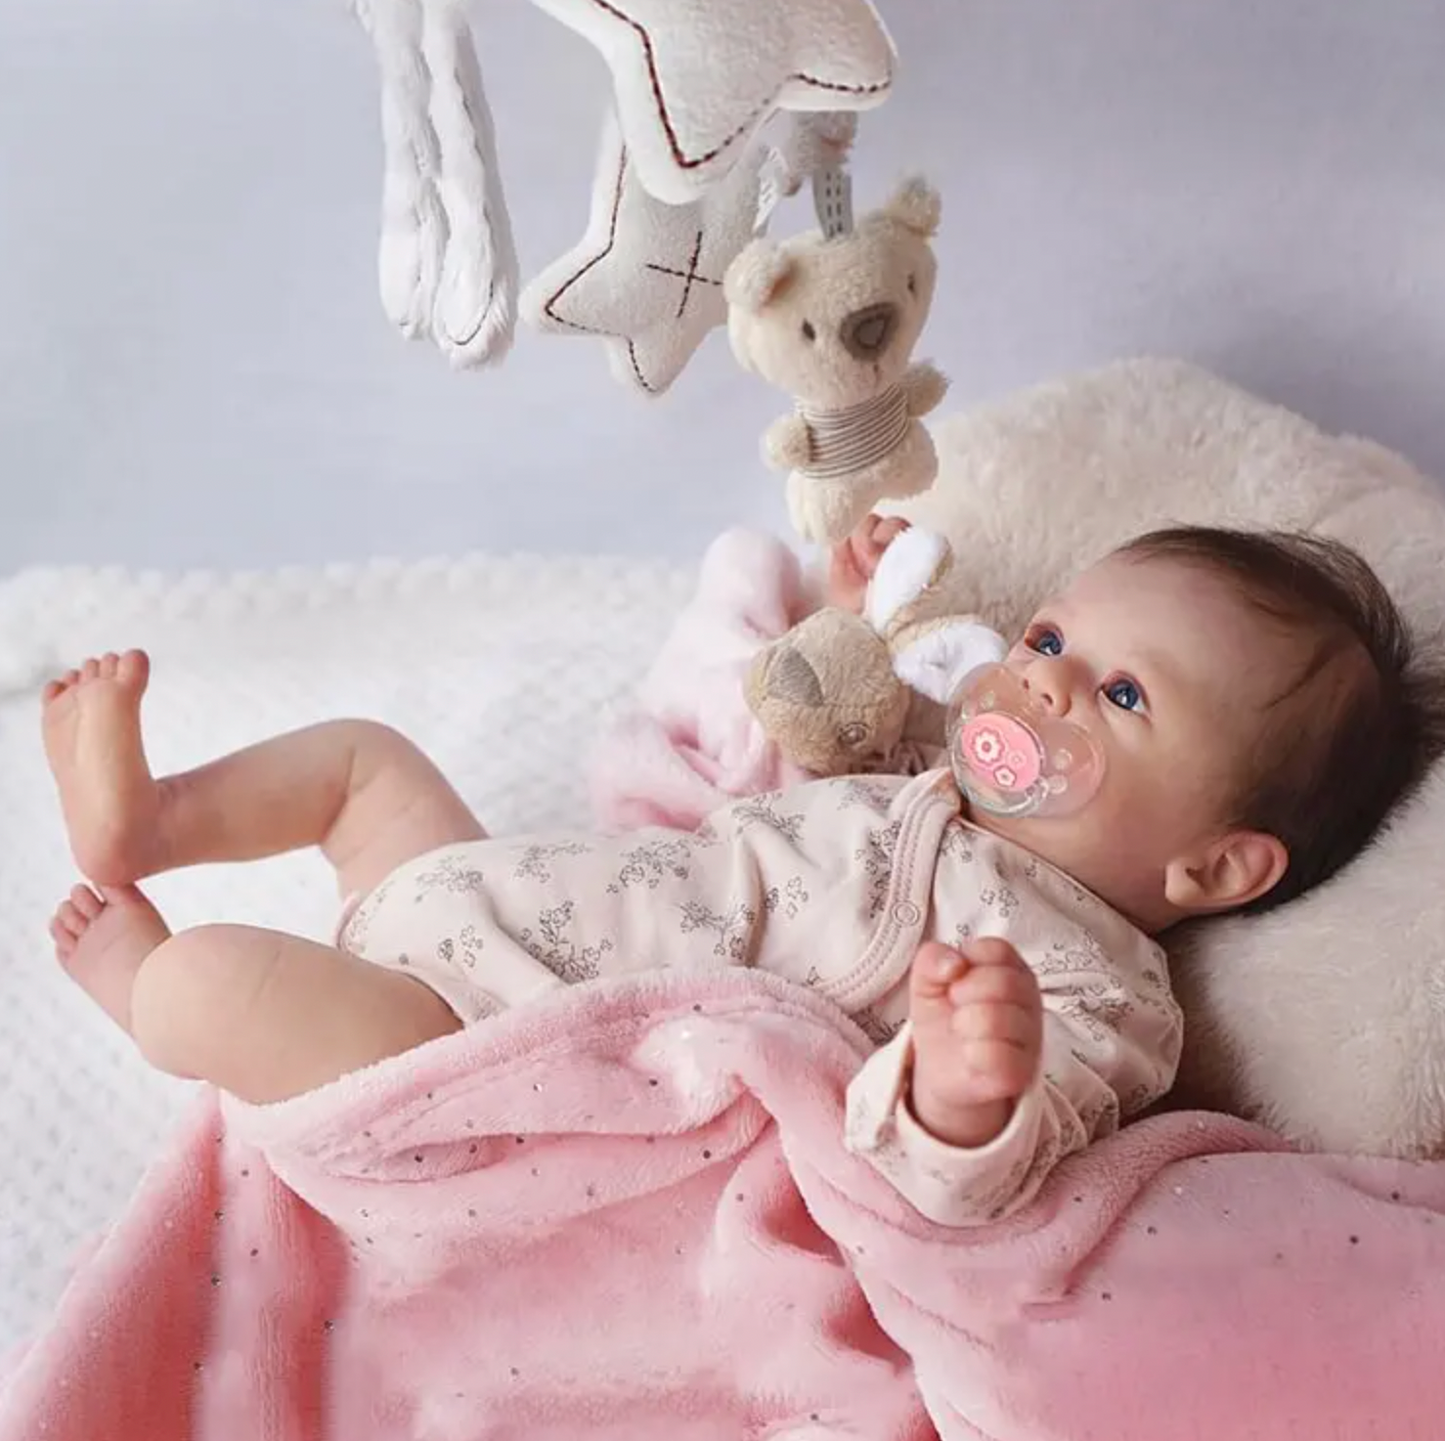 Heaven Doll Isabella 18" inch Realistic and Cute Reborn Baby Doll Girl